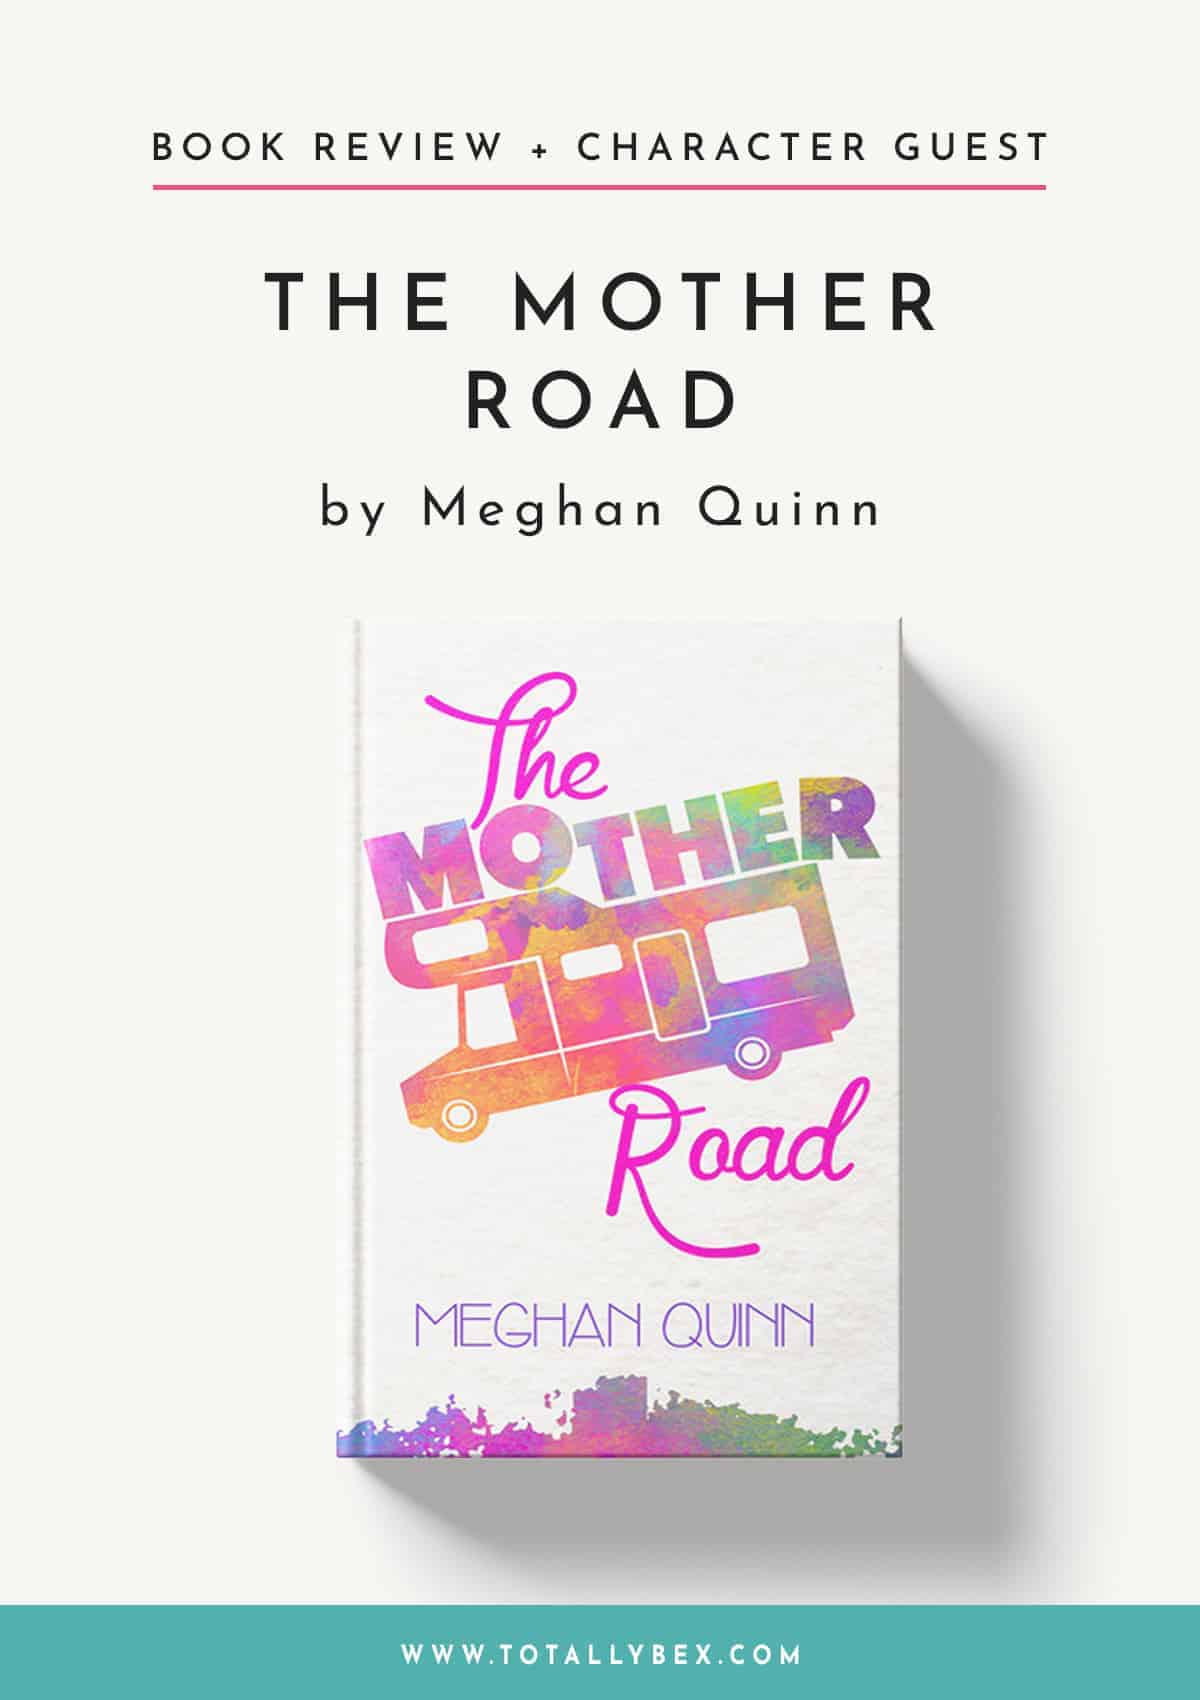 The Mother Road by Meghan Quinn-Book Review+Character Guest